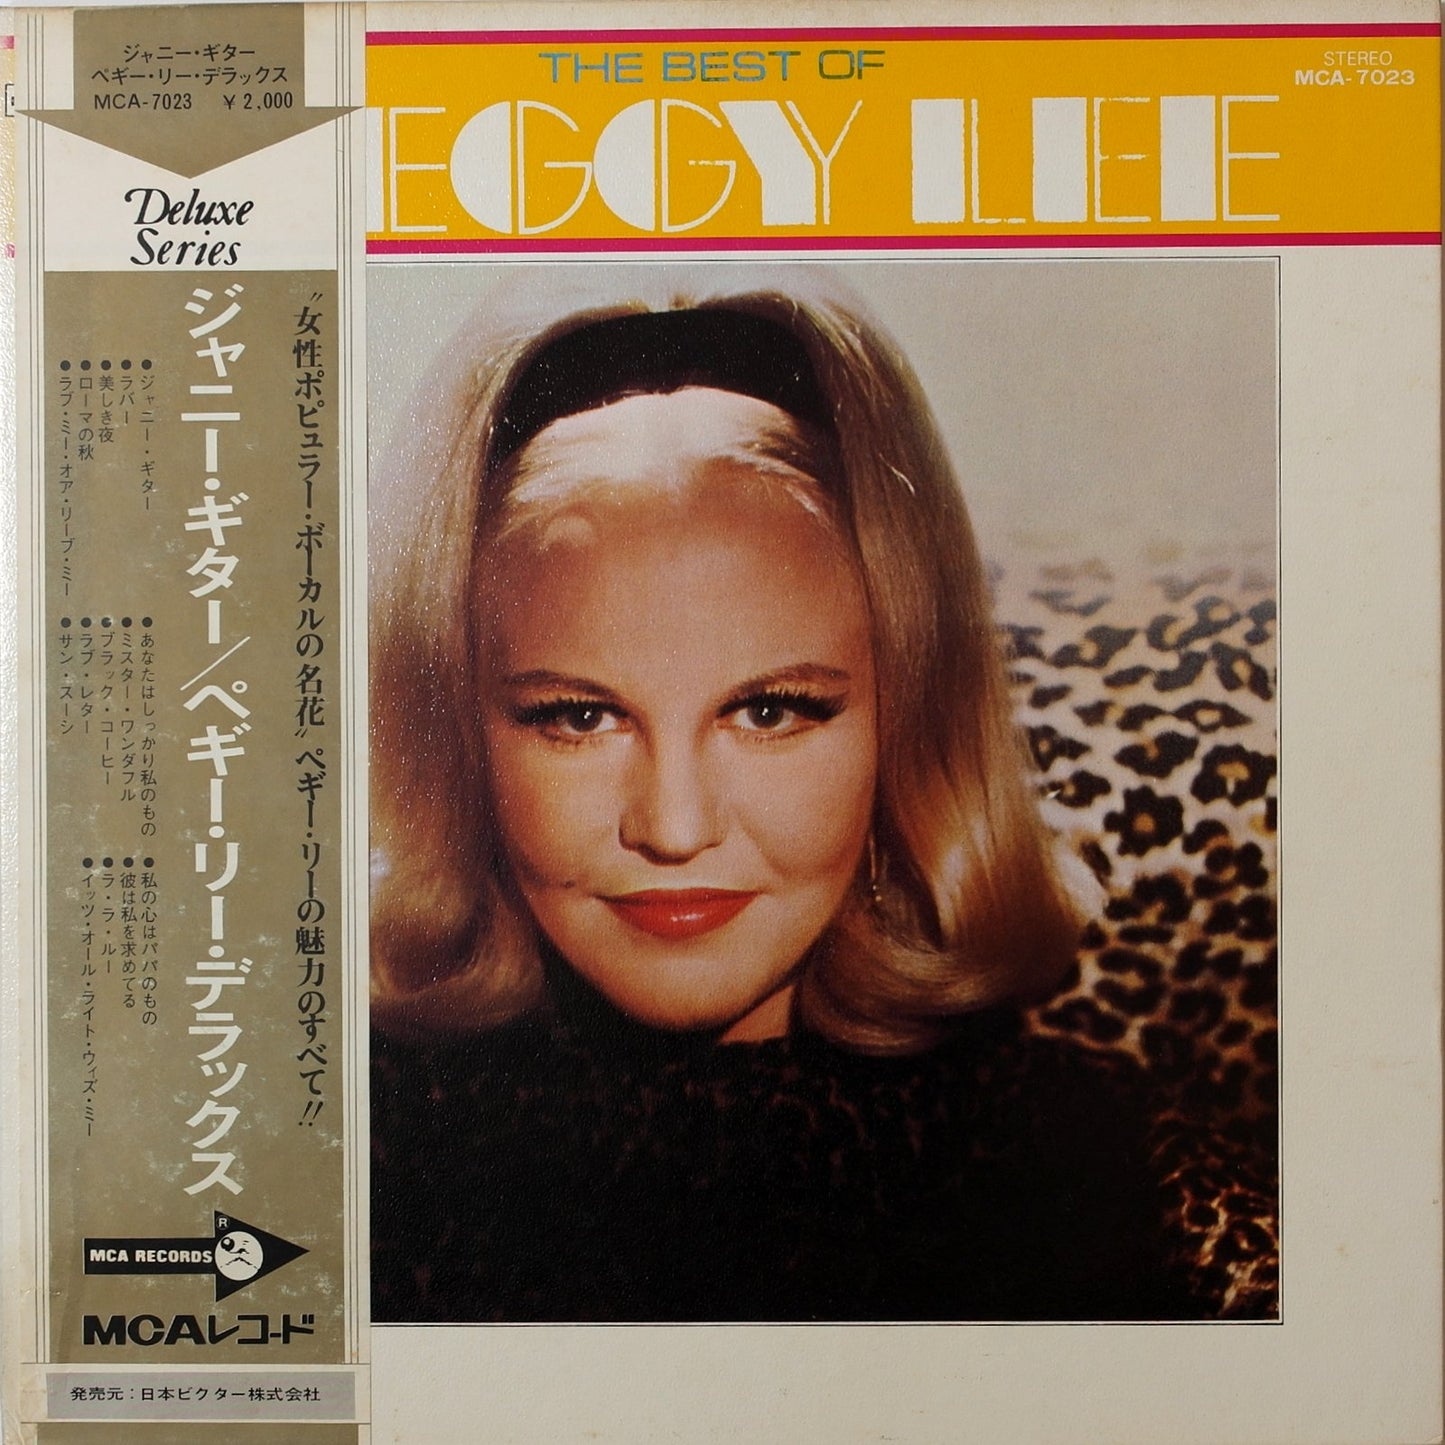 PEGGY LEE - The Best Of Peggy Lee